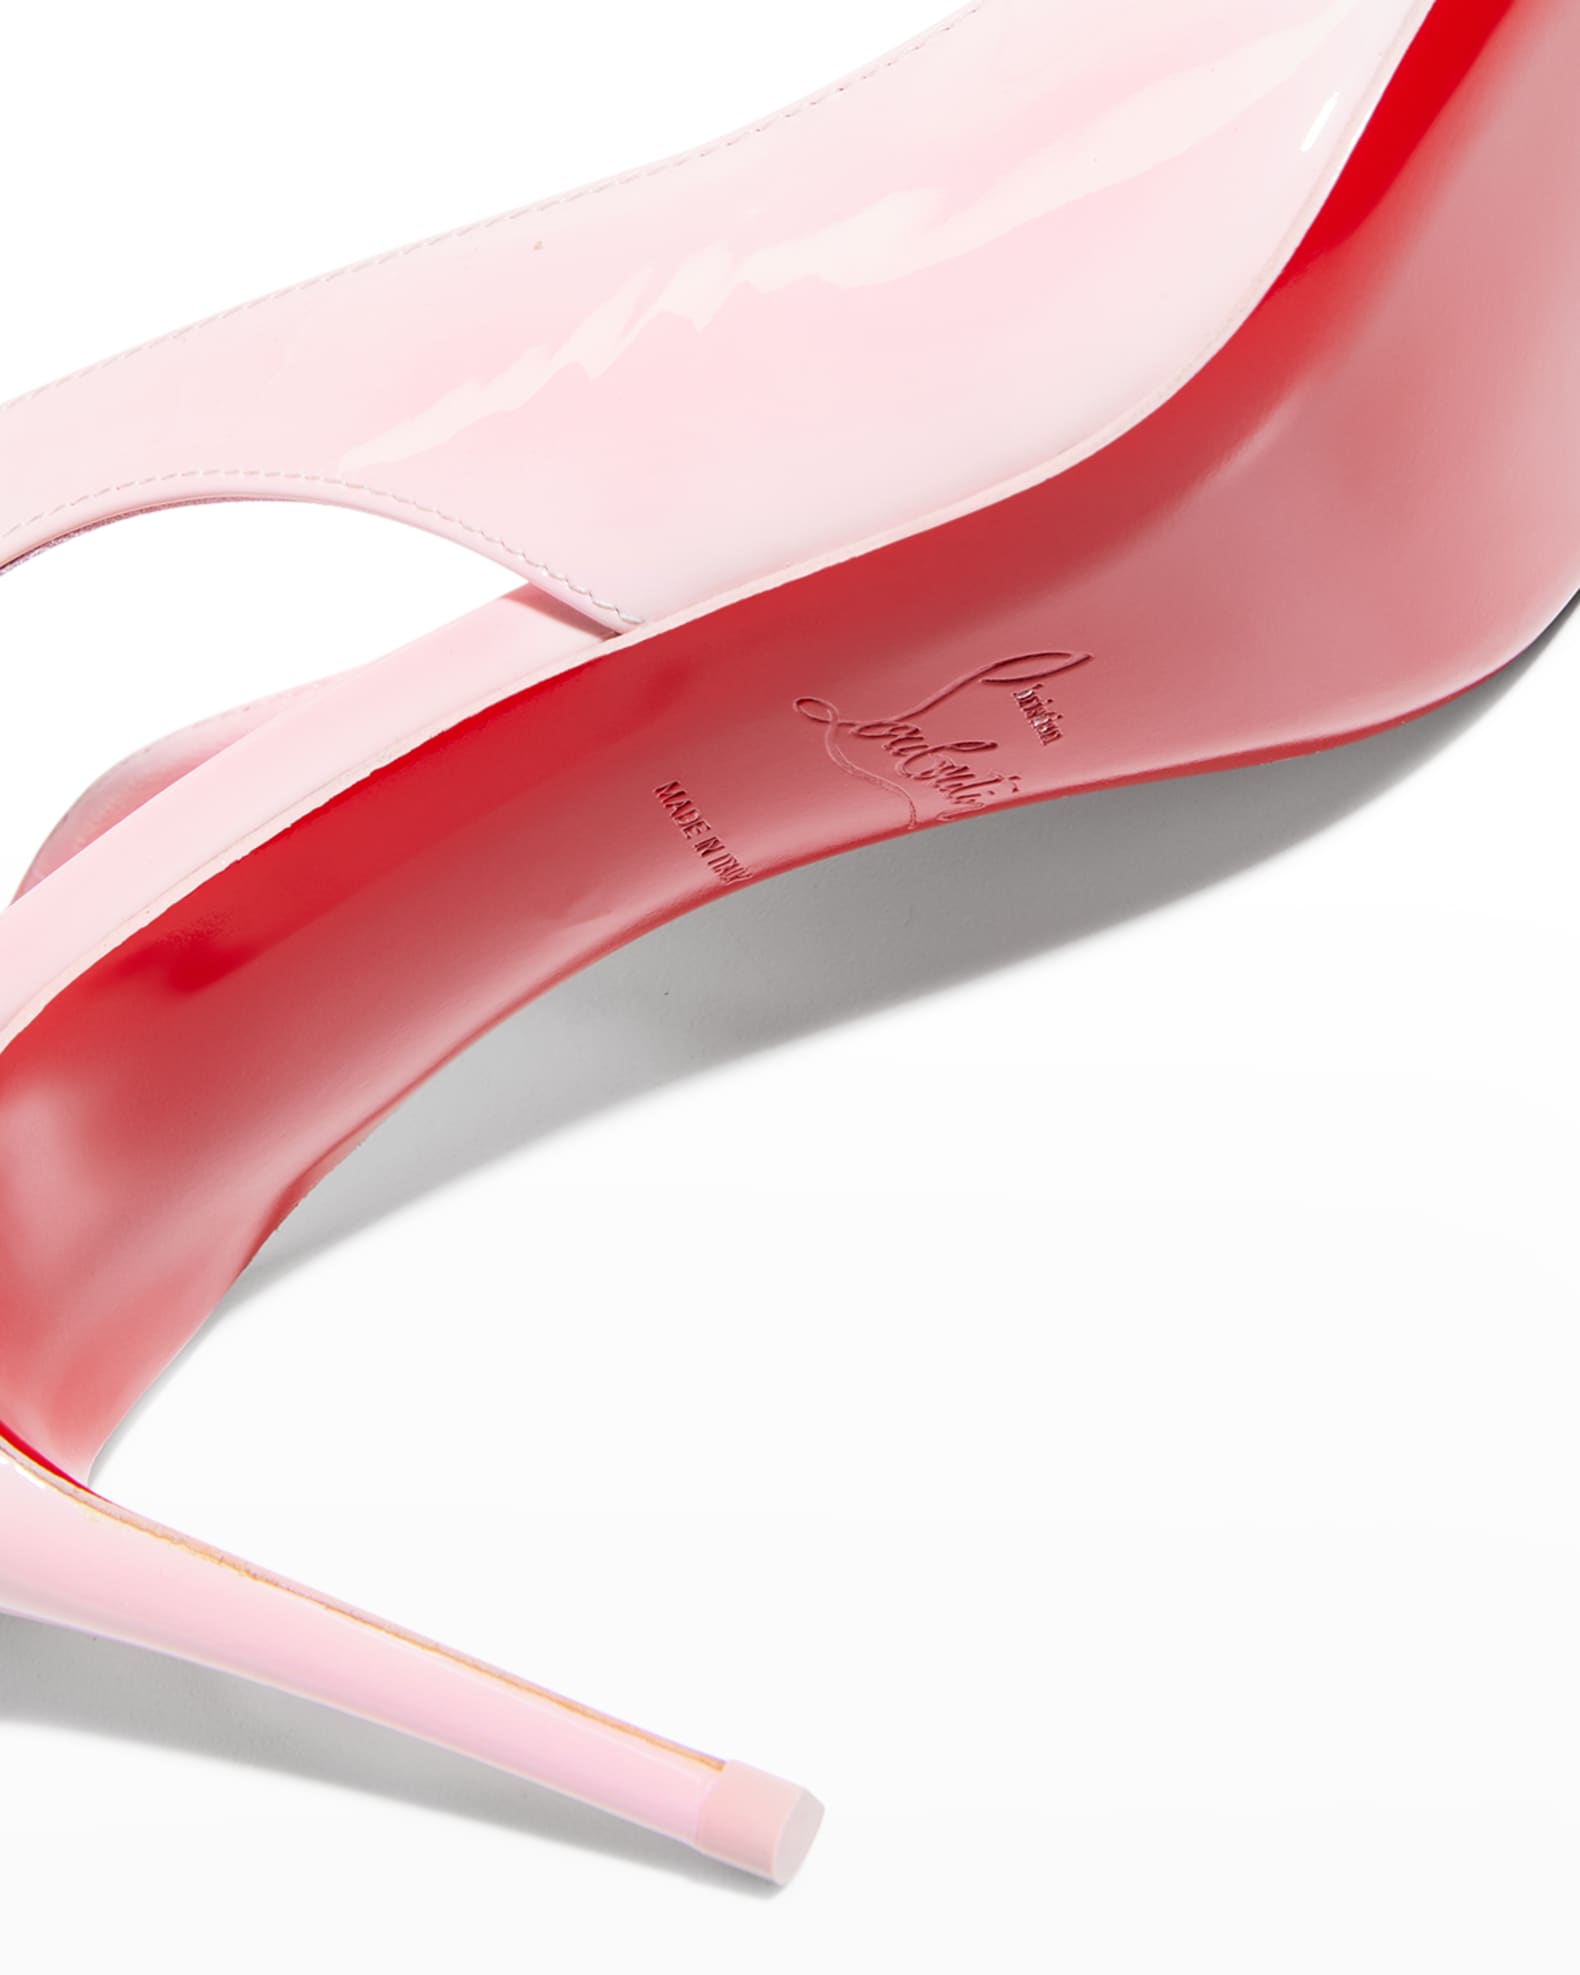 Christian Louboutin Hot Chick Patent Red Sole Slingback Pumps Neiman Marcus